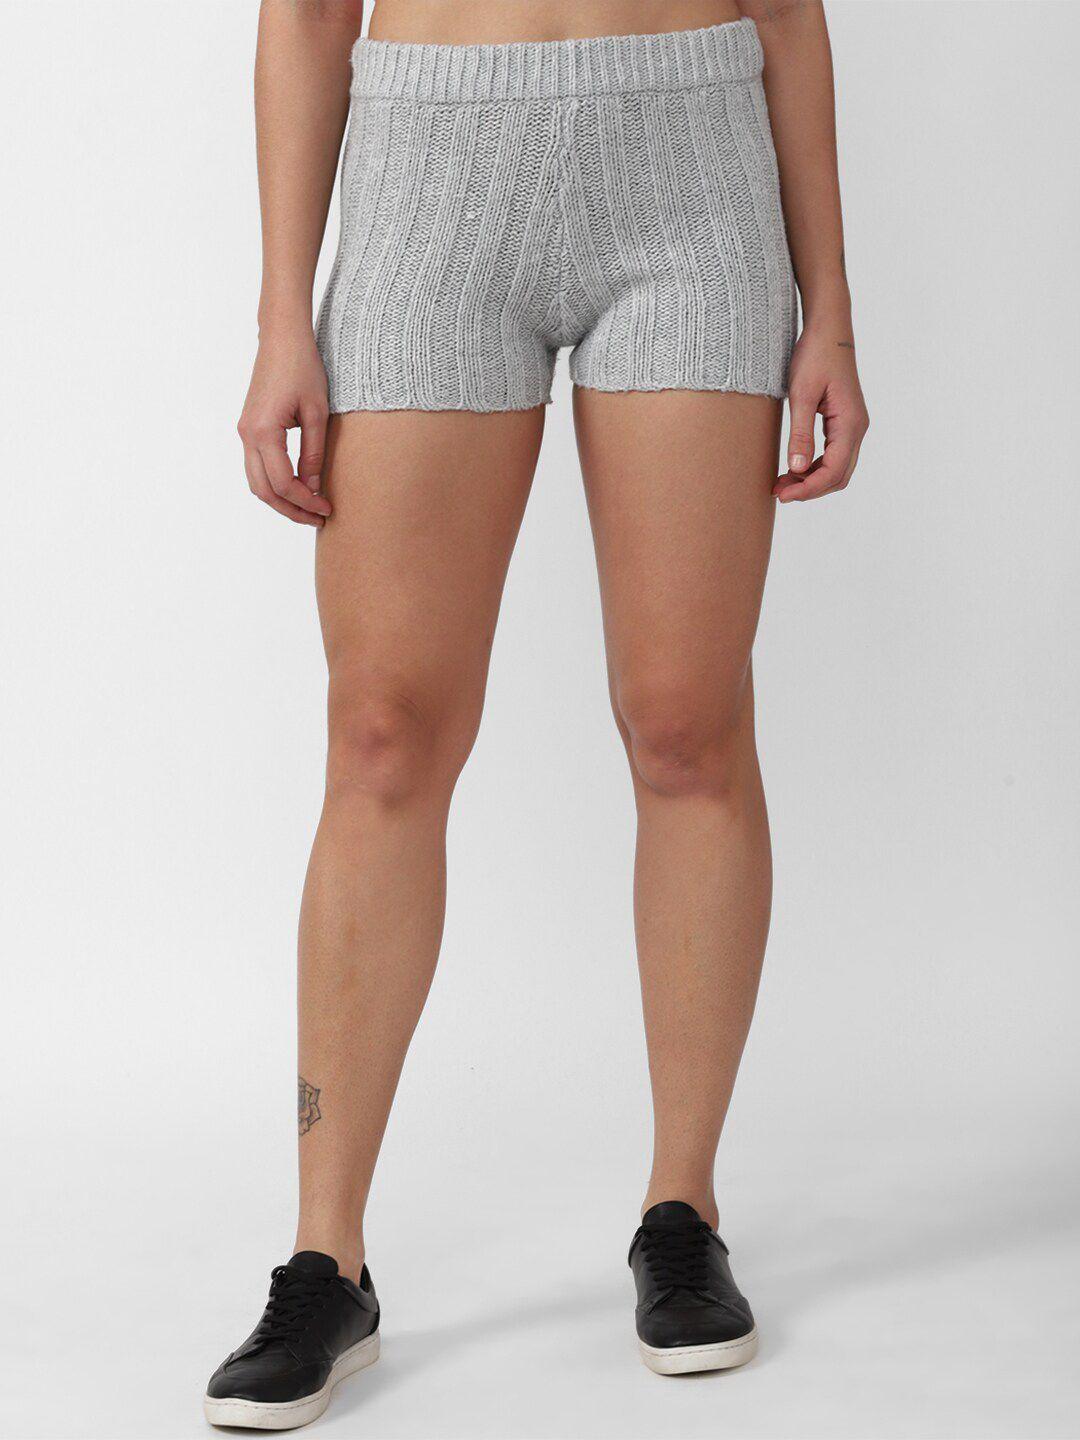 forever 21 women grey striped striped hot pants shorts